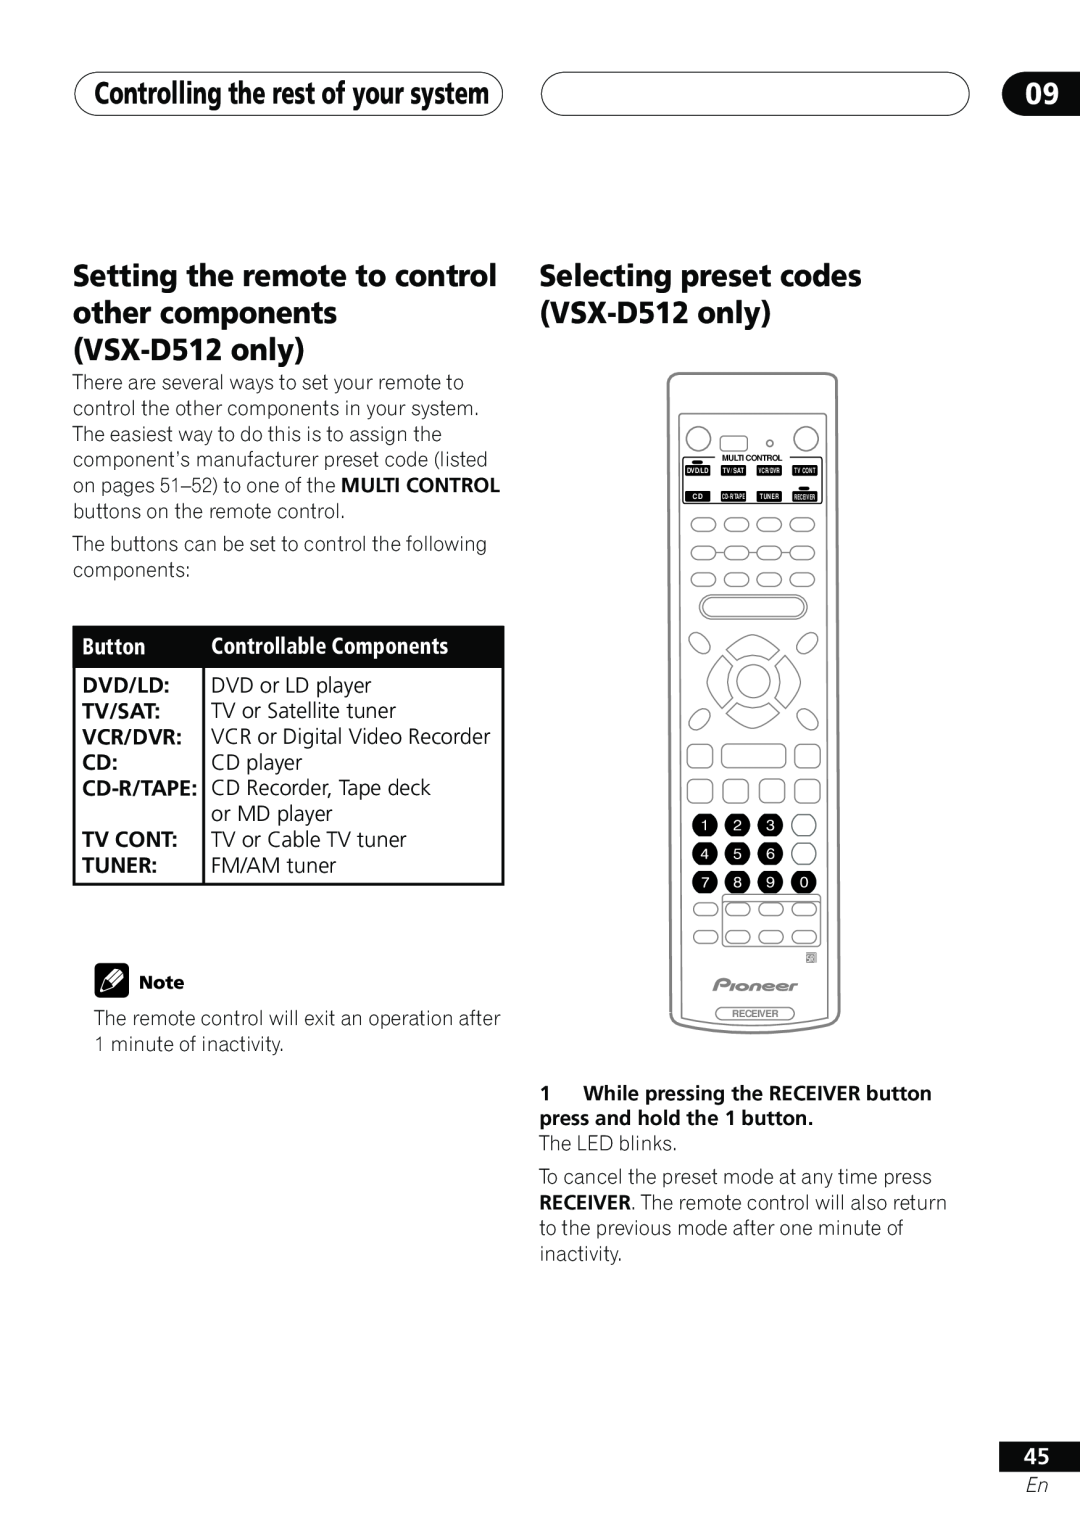 Pioneer vsx-d412 Selecting preset codes VSX-D512only, Controlling the rest of your system, Button, Controllable Components 